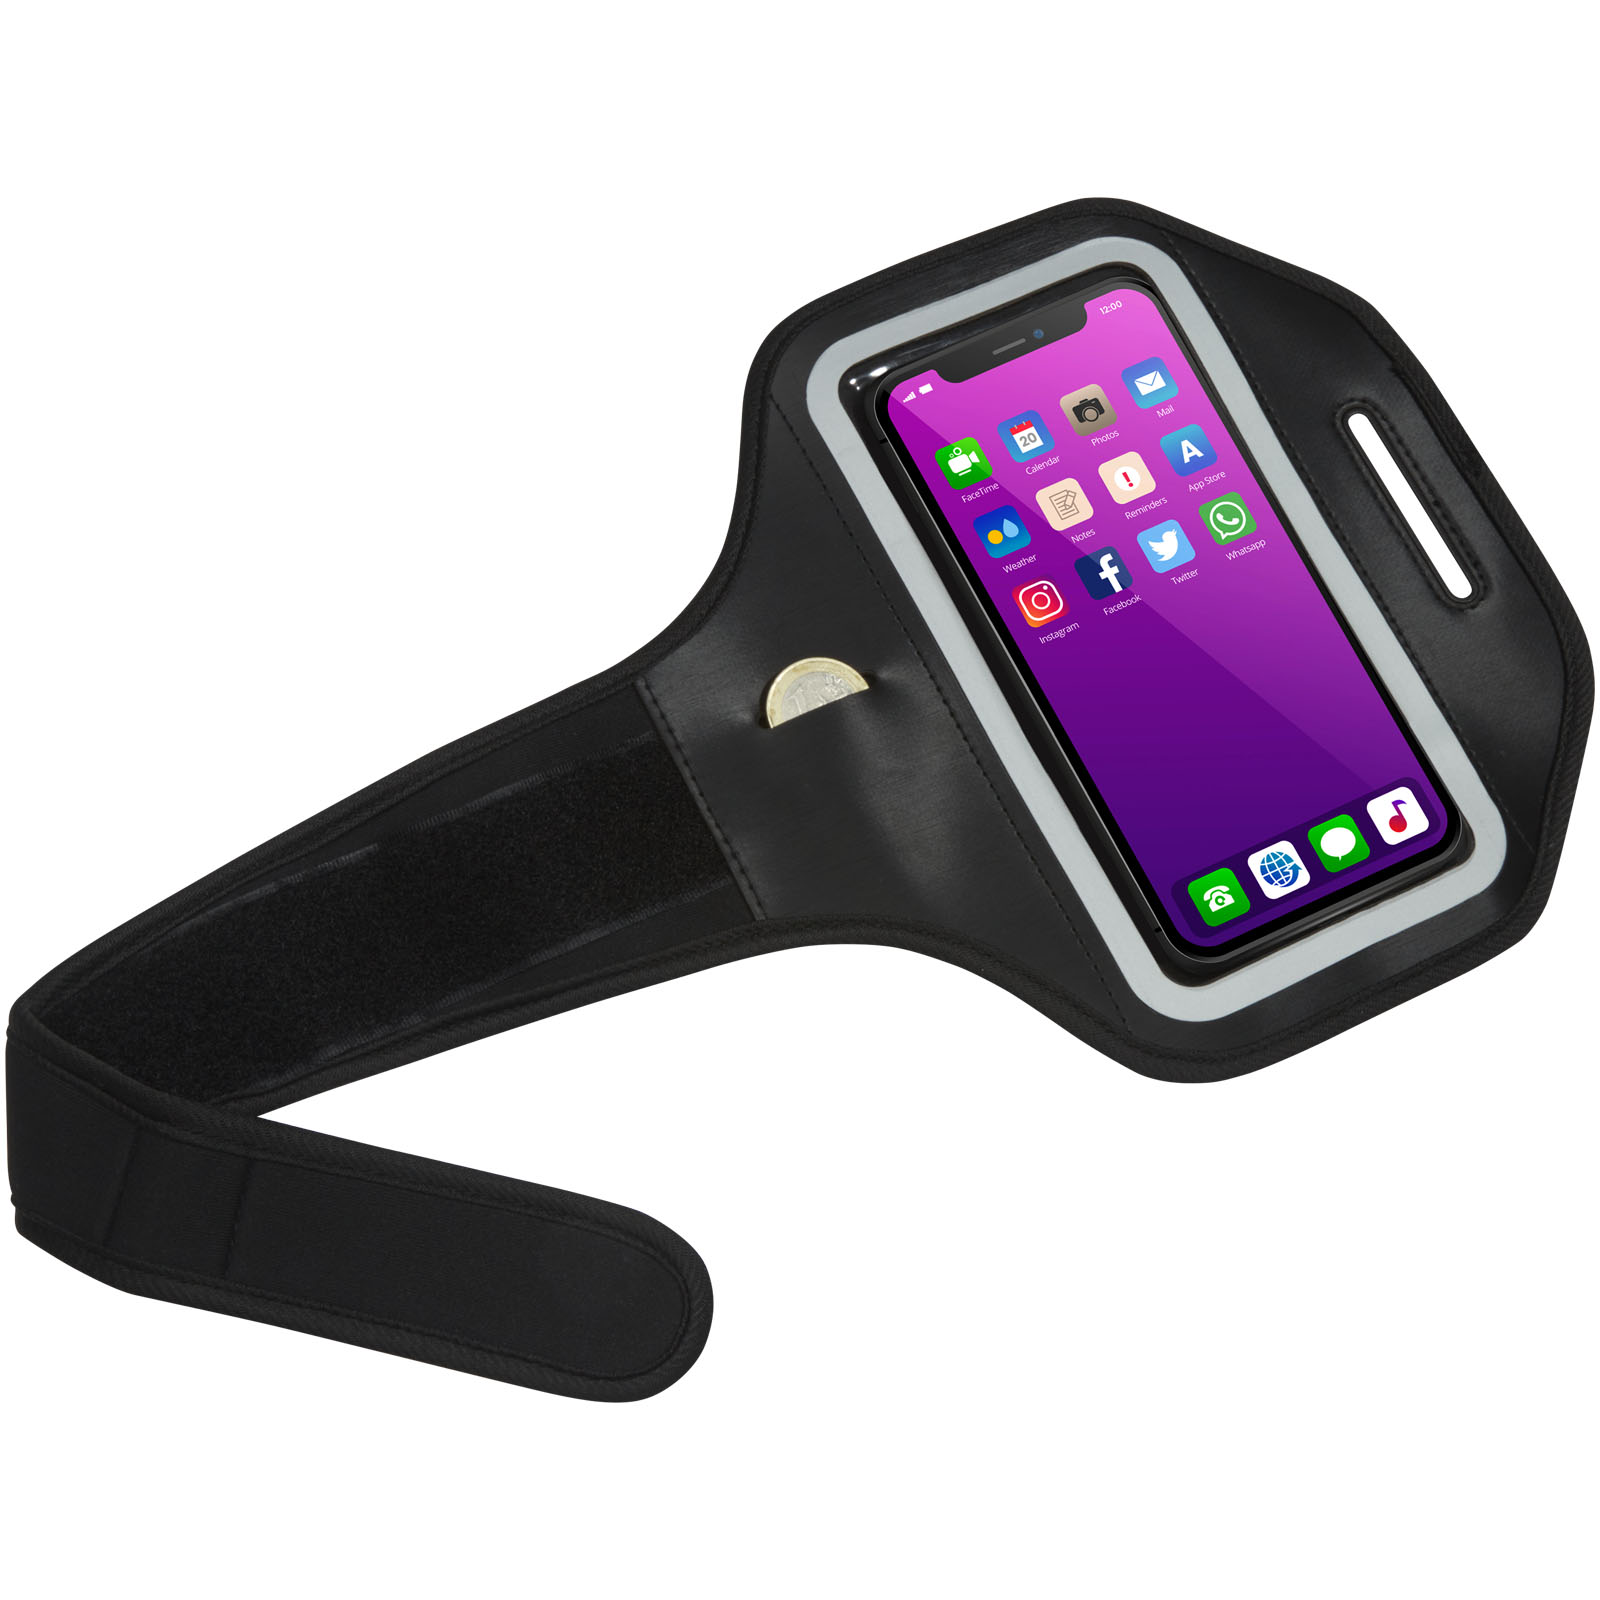 Advertising Telephone & Tablet Accessories - Haile reflective smartphone bracelet with transparent cover - 3